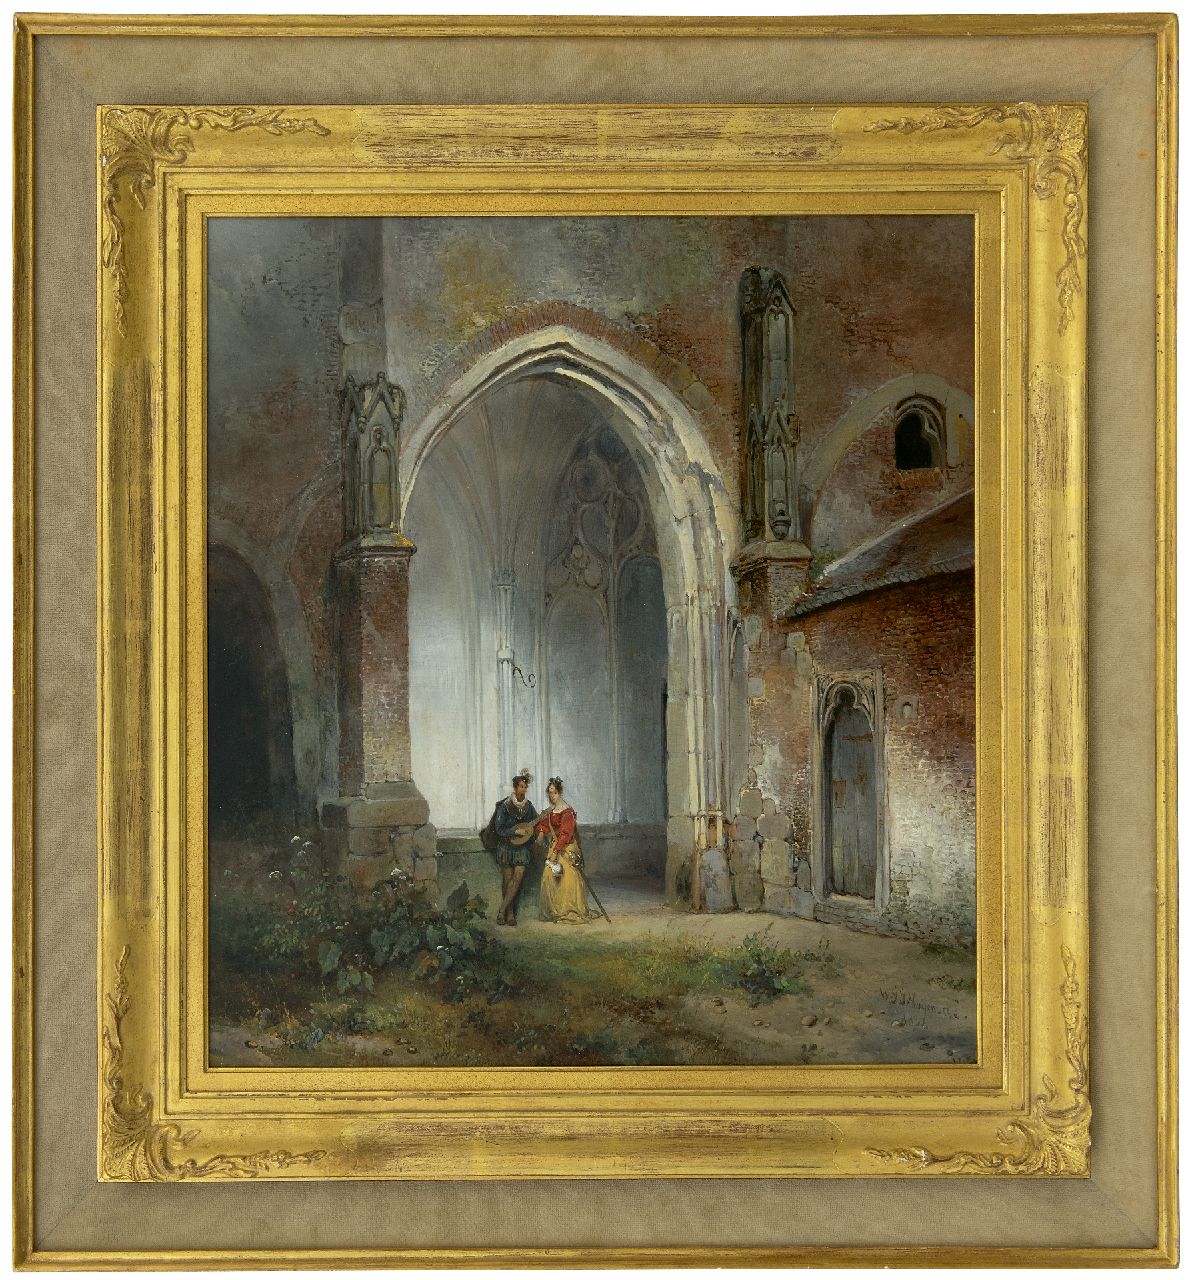 Nuijen W.J.J.  | Wijnandus Johannes Josephus 'Wijnand' Nuijen | Paintings offered for sale | A man and woman in the cloister of the Dom Church in Utrecht, oil on panel 49.0 x 44.8 cm, signed l.r. and dated 1832